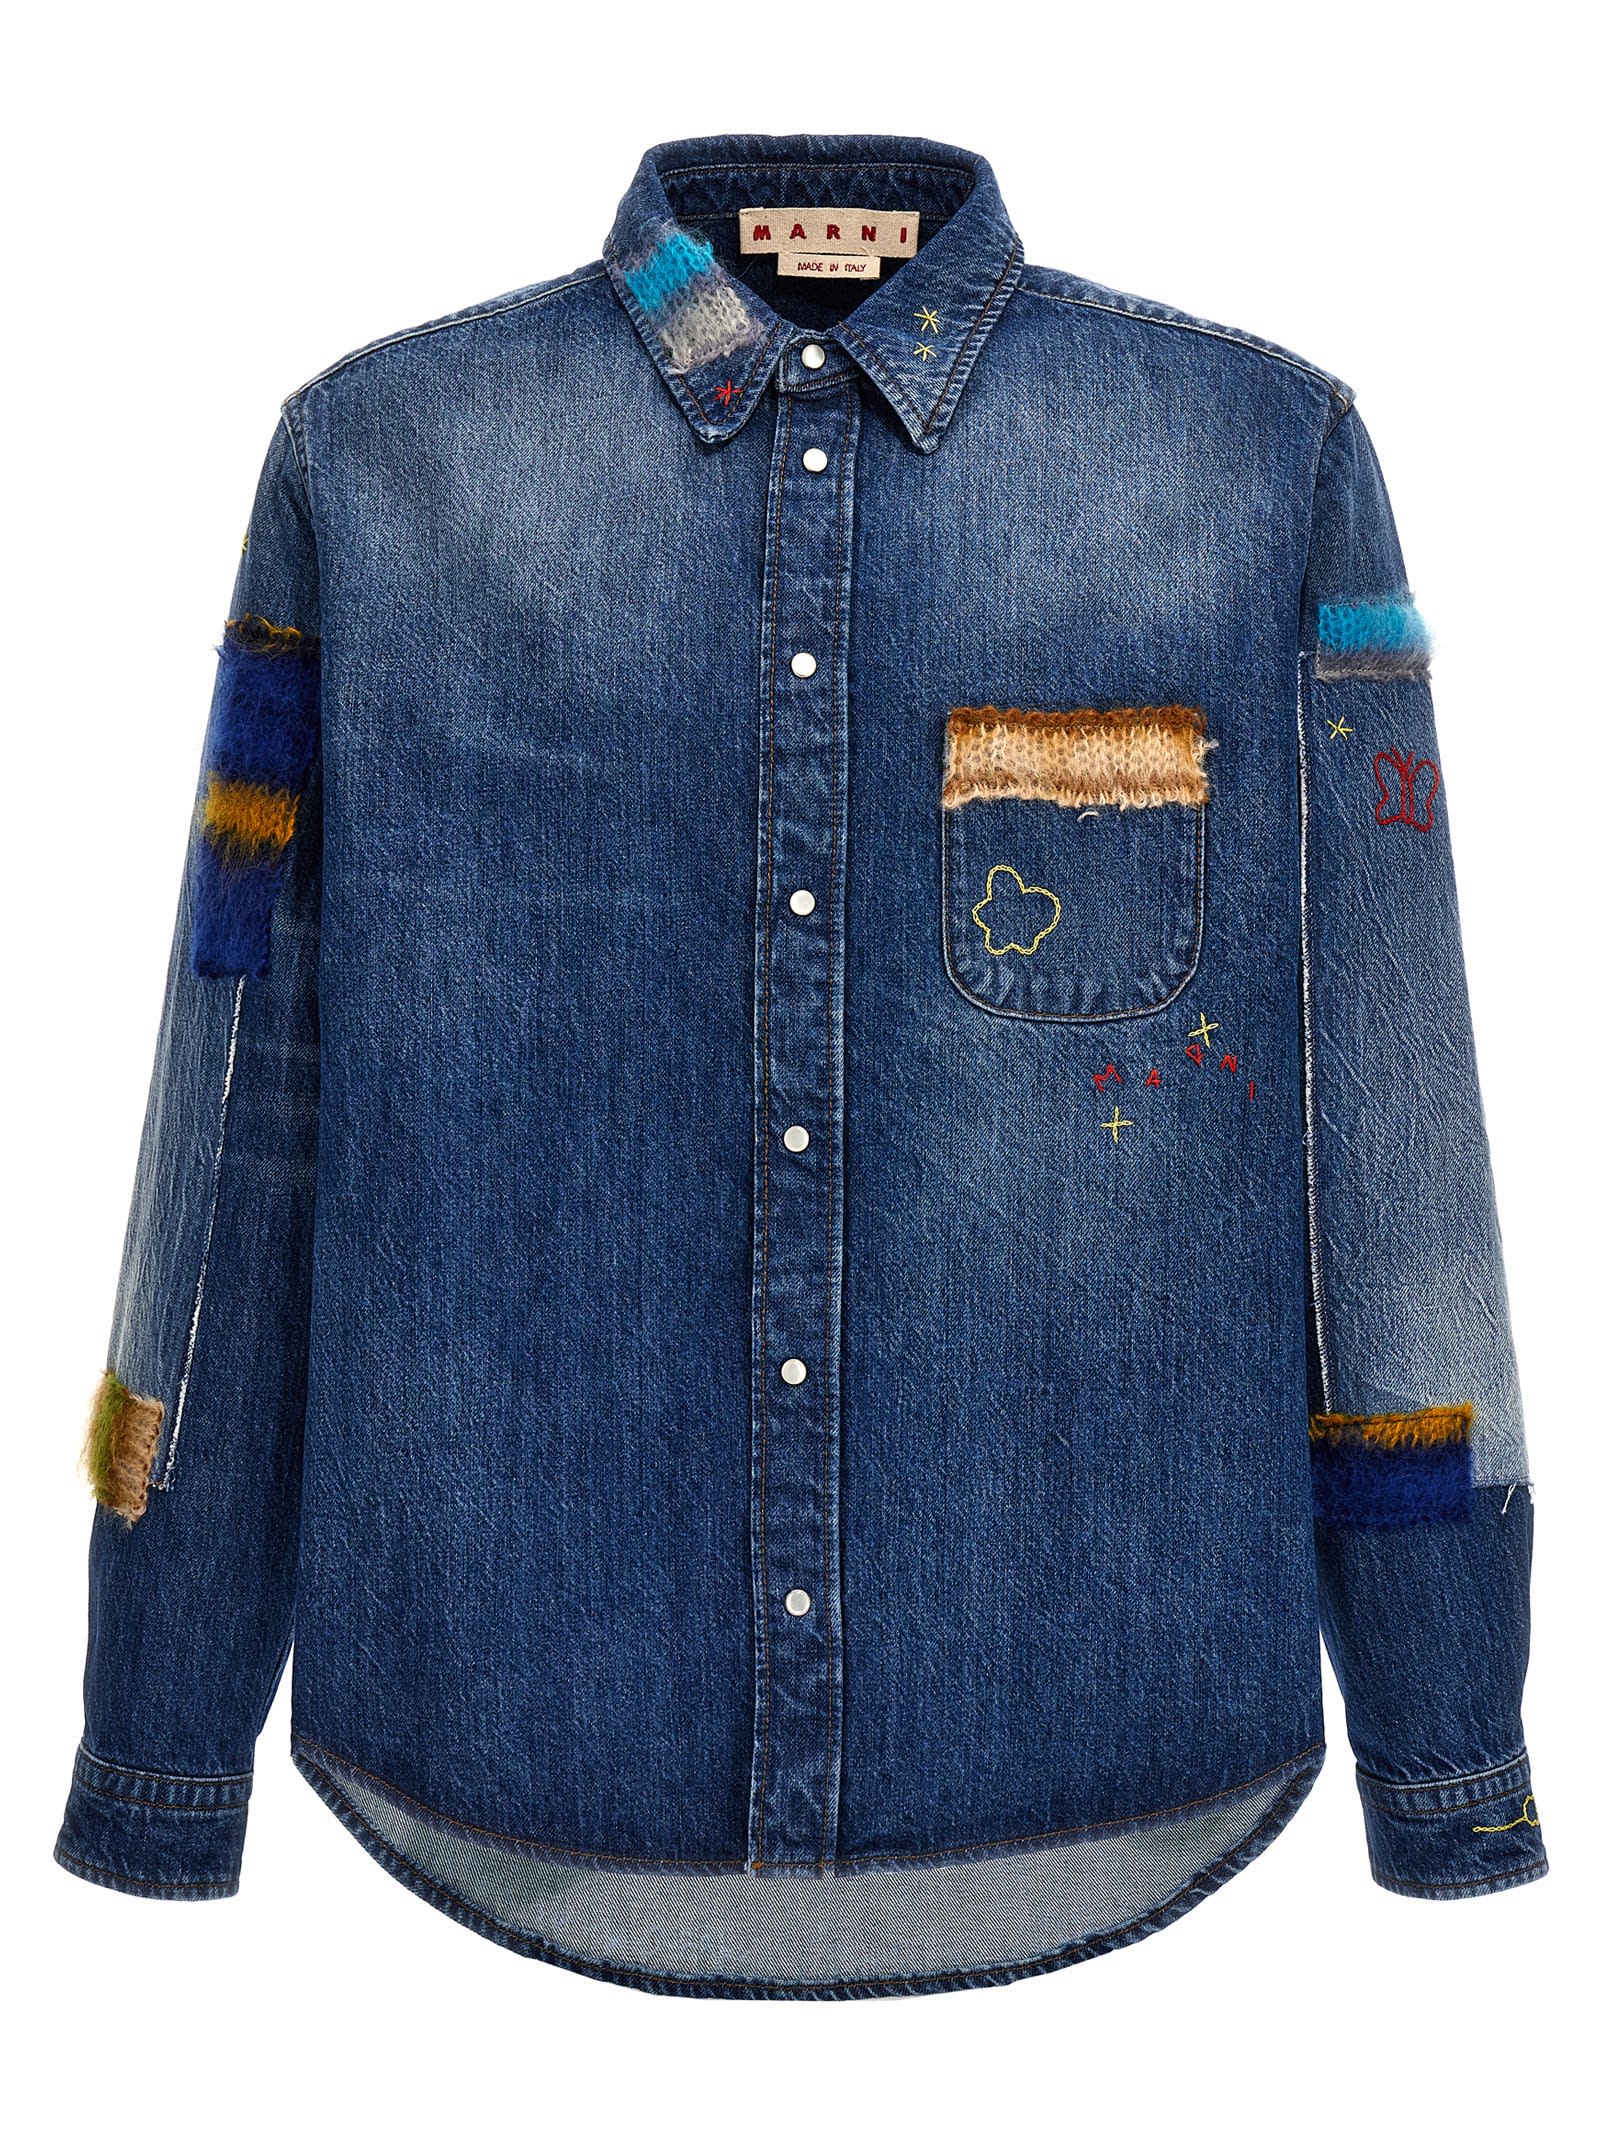 Denim Shirt, Embroidery And Patches